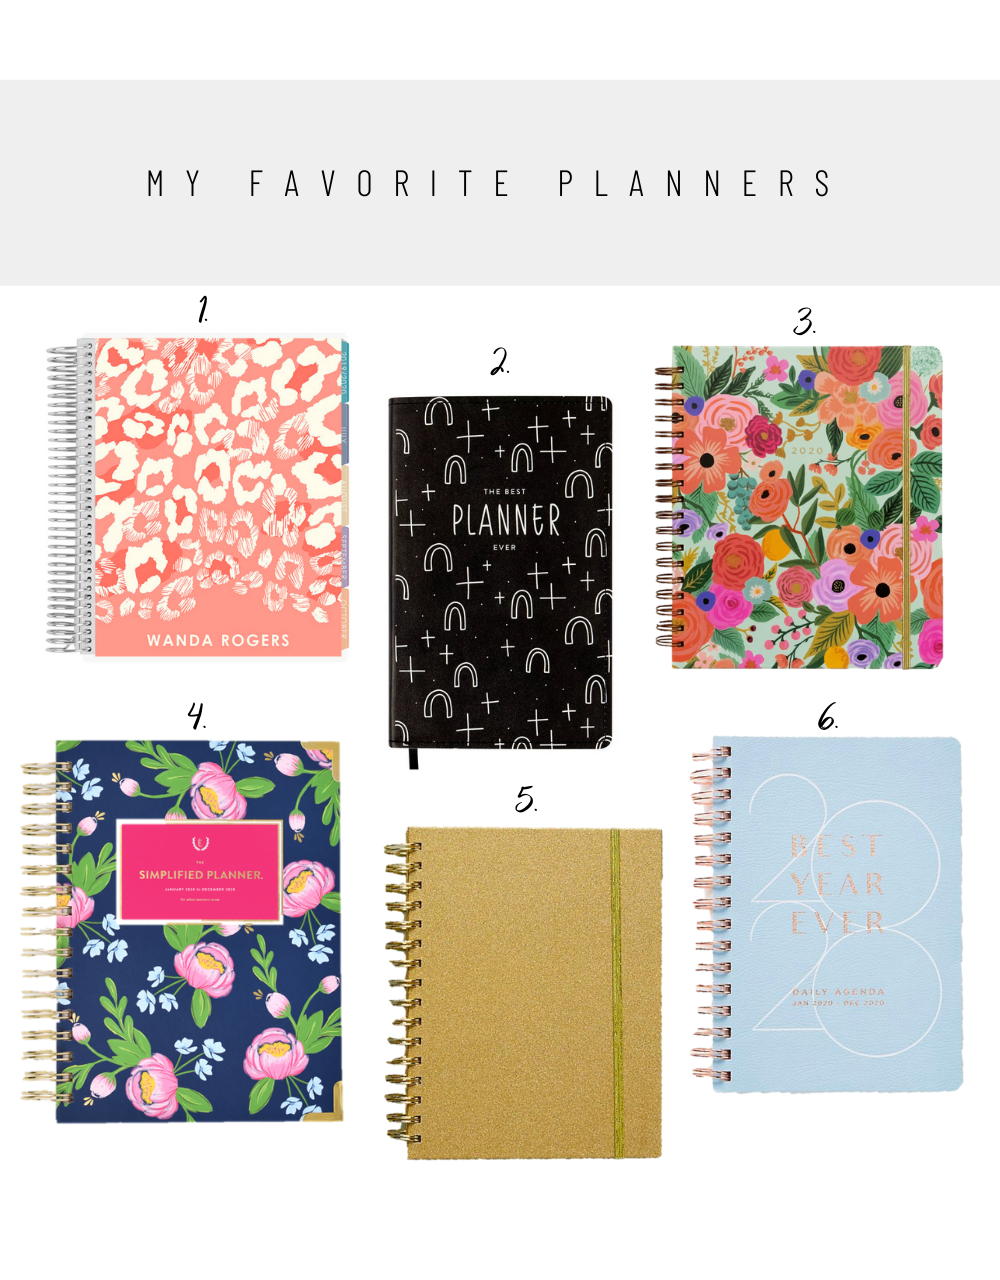 Kailee Wright Planner Guide